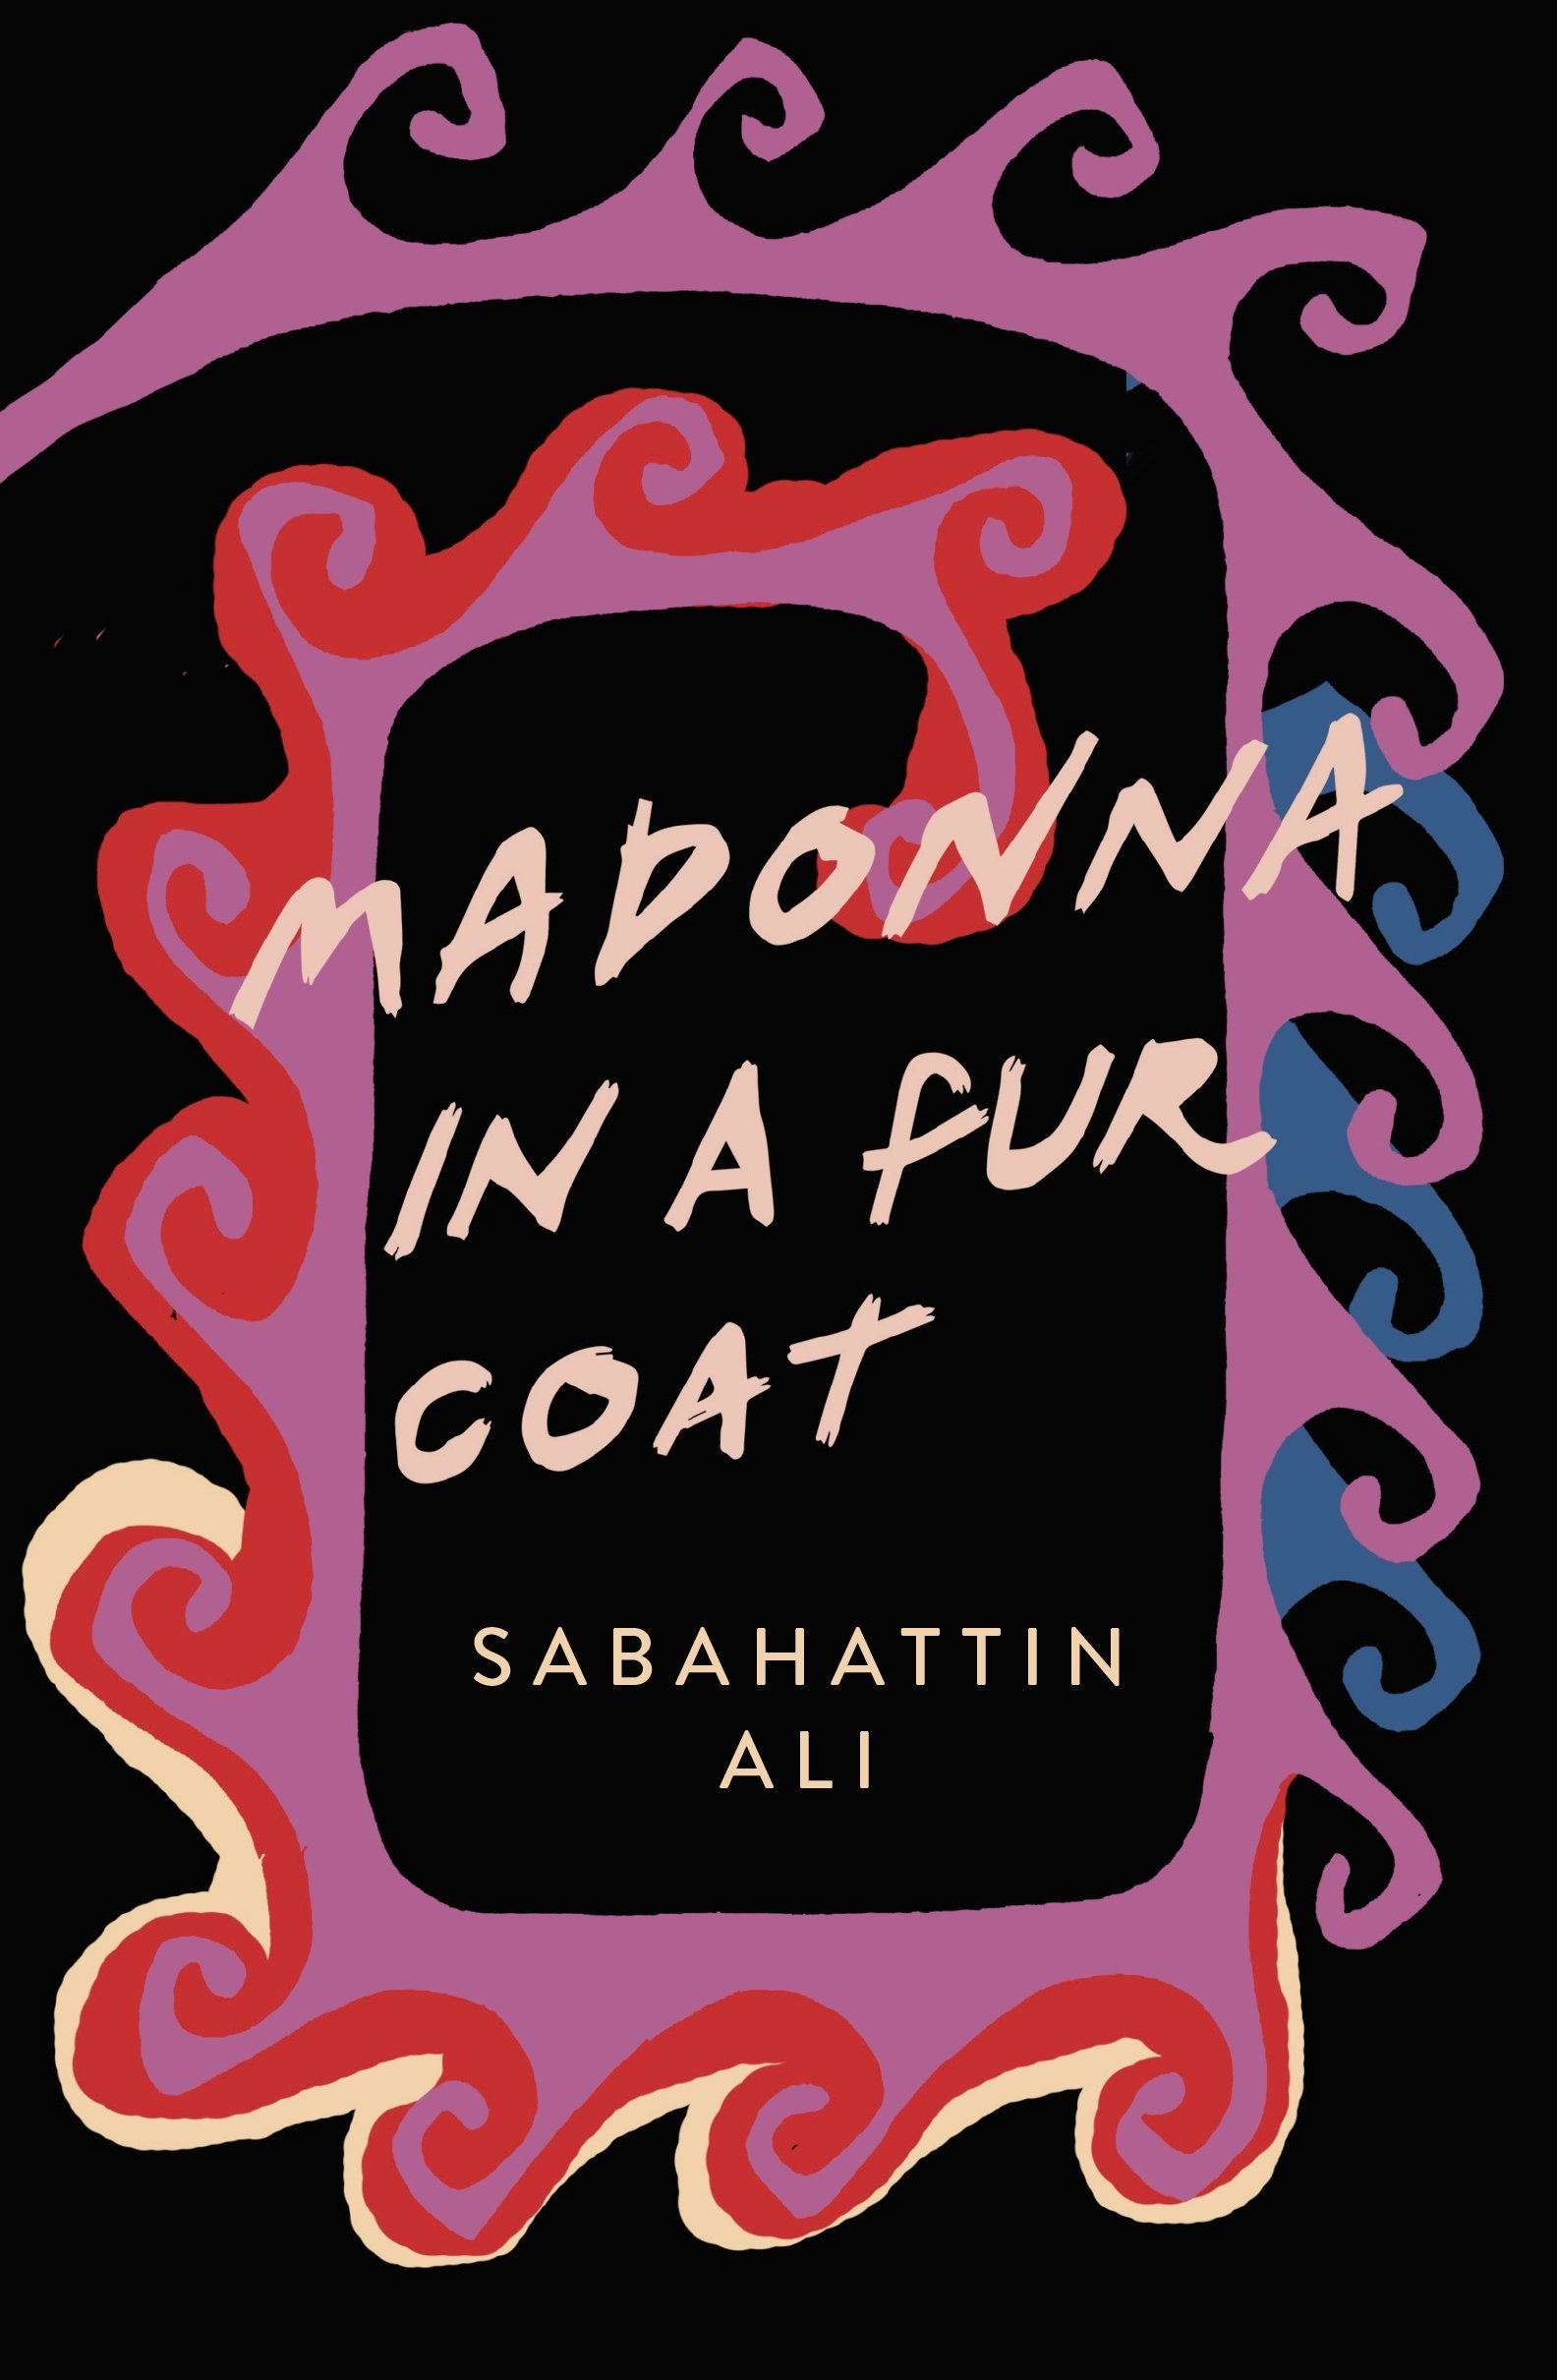 Cover of Sabahattin Ali's "Madonna in a fur coat" (published by Penguin Classics)